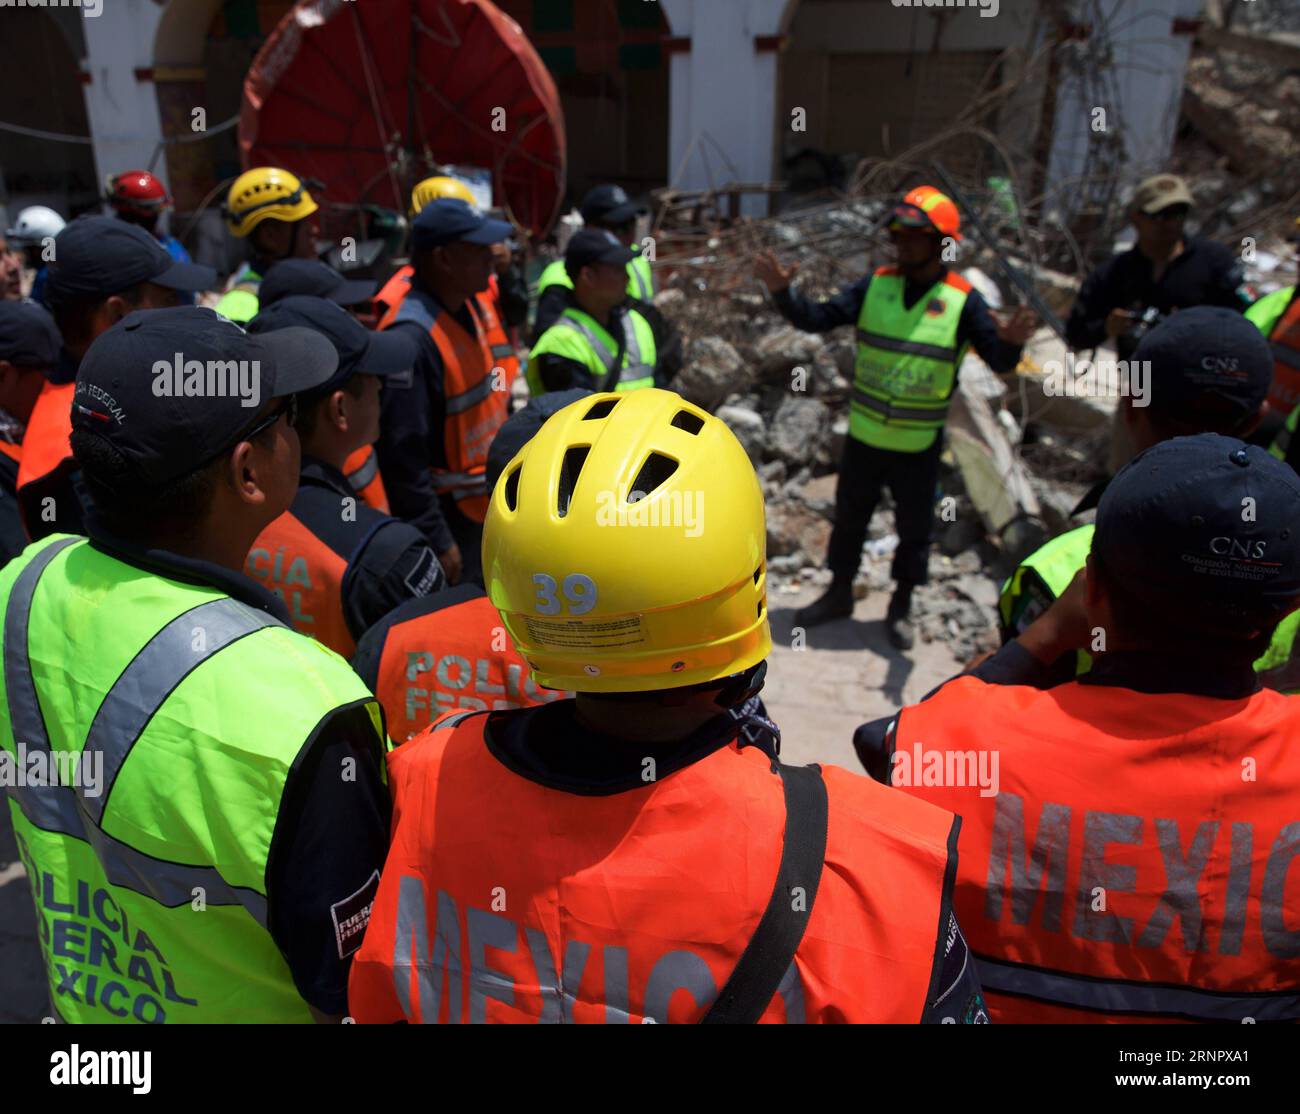 (170910) -- JUCHITAN (MEXICO), Sept. 10, 2017 -- Rescue workers wait to enter a searching zone after an earthquake hit in Juchitan, Oaxaca state, Mexico, Sept. 9, 2017. A powerful earthquake measuring 8.2 on the Richter scale struck off Mexico s southern coast late Thursday night, killing 90 people. ) MEXICO-OAXACA-JUCHITAN-EARTHQUAKE DanxHang PUBLICATIONxNOTxINxCHN Stock Photo